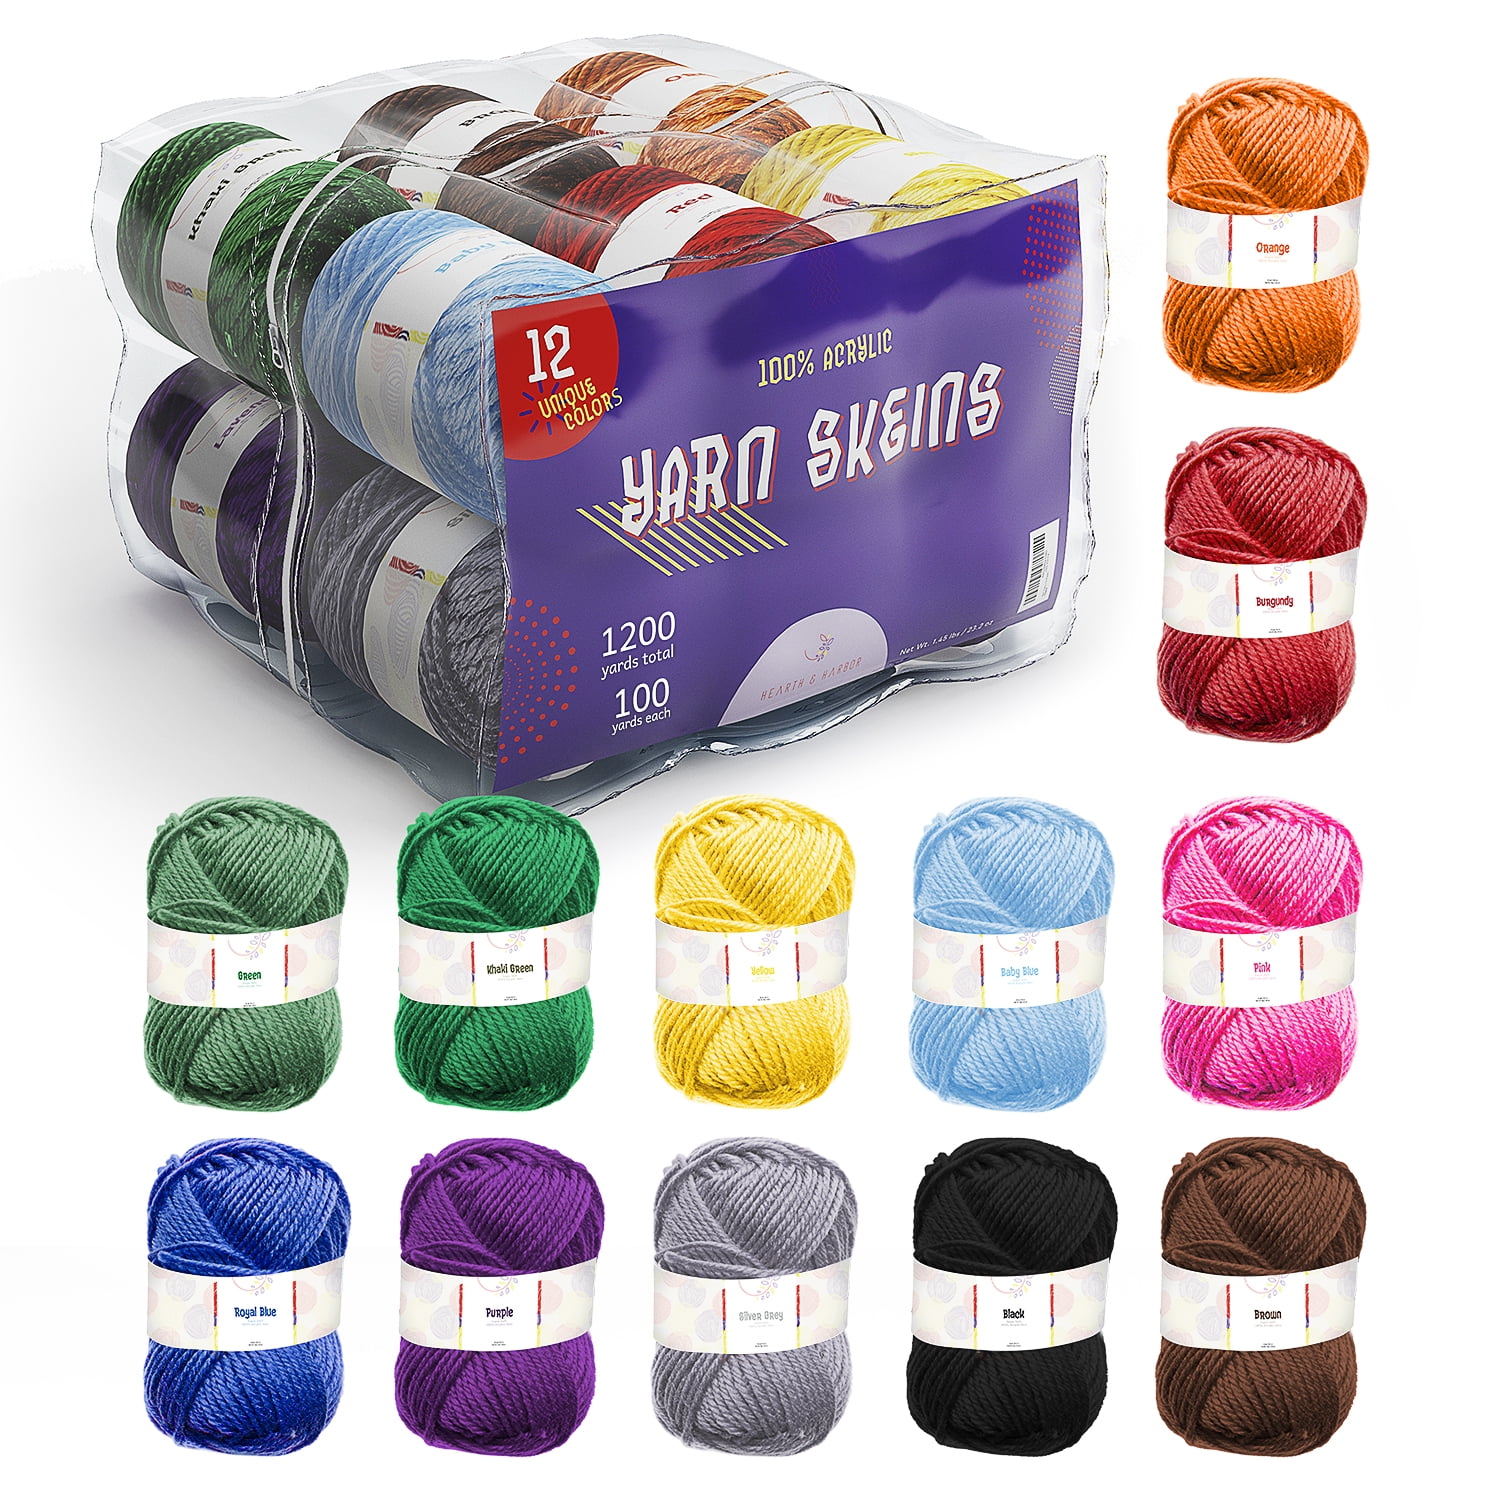 12 Colors Acrylic Yarn Mini of Soft Yarn for Crocheting and Knitting Craft  Project, Assorted Starter Crochet Kit Yarn Bulk for Adults and Kids